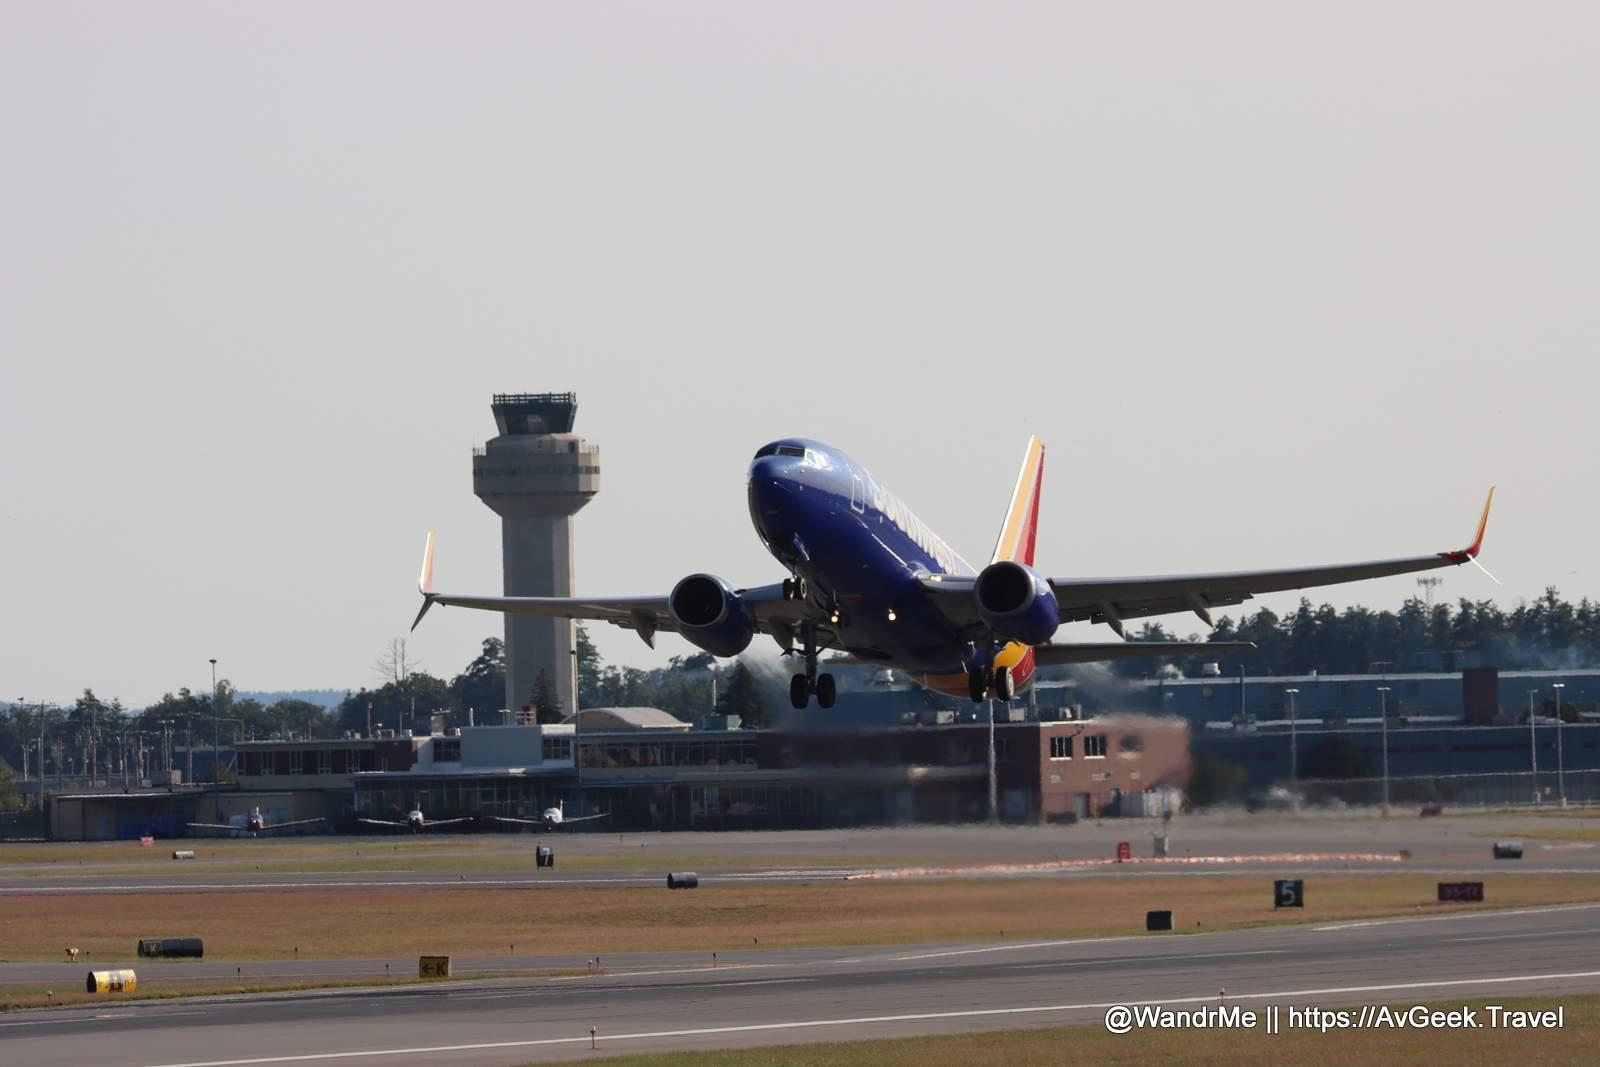 A Southwest 737-700 departing MHT on RWY 06, spotted from this location.